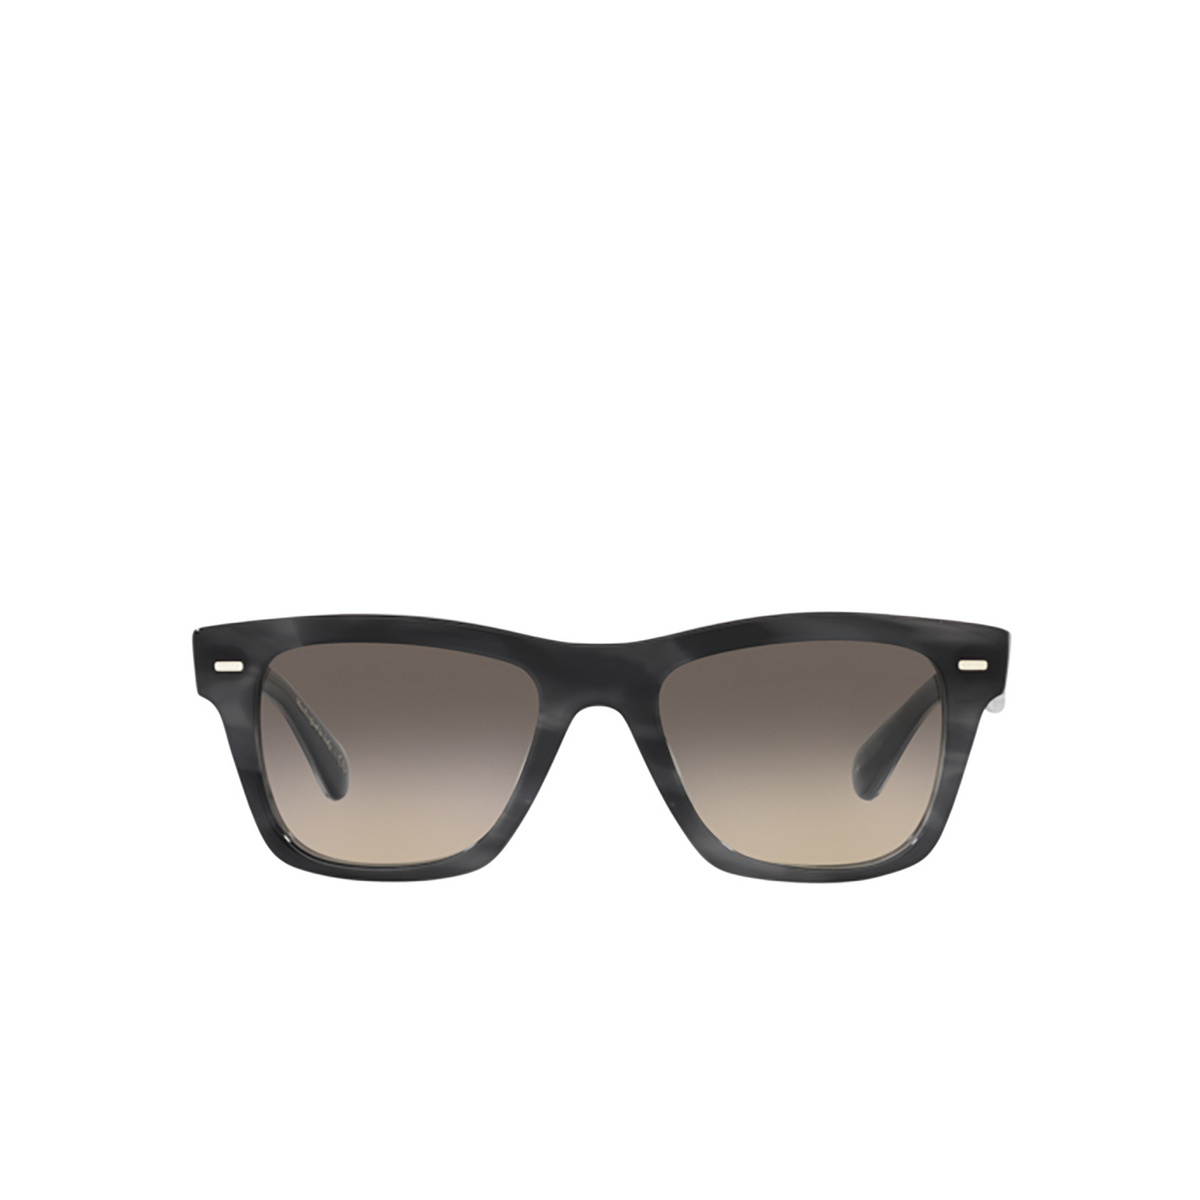 Oliver Peoples OLIVER Sunglasses 166132 Charcoal tortoise - front view